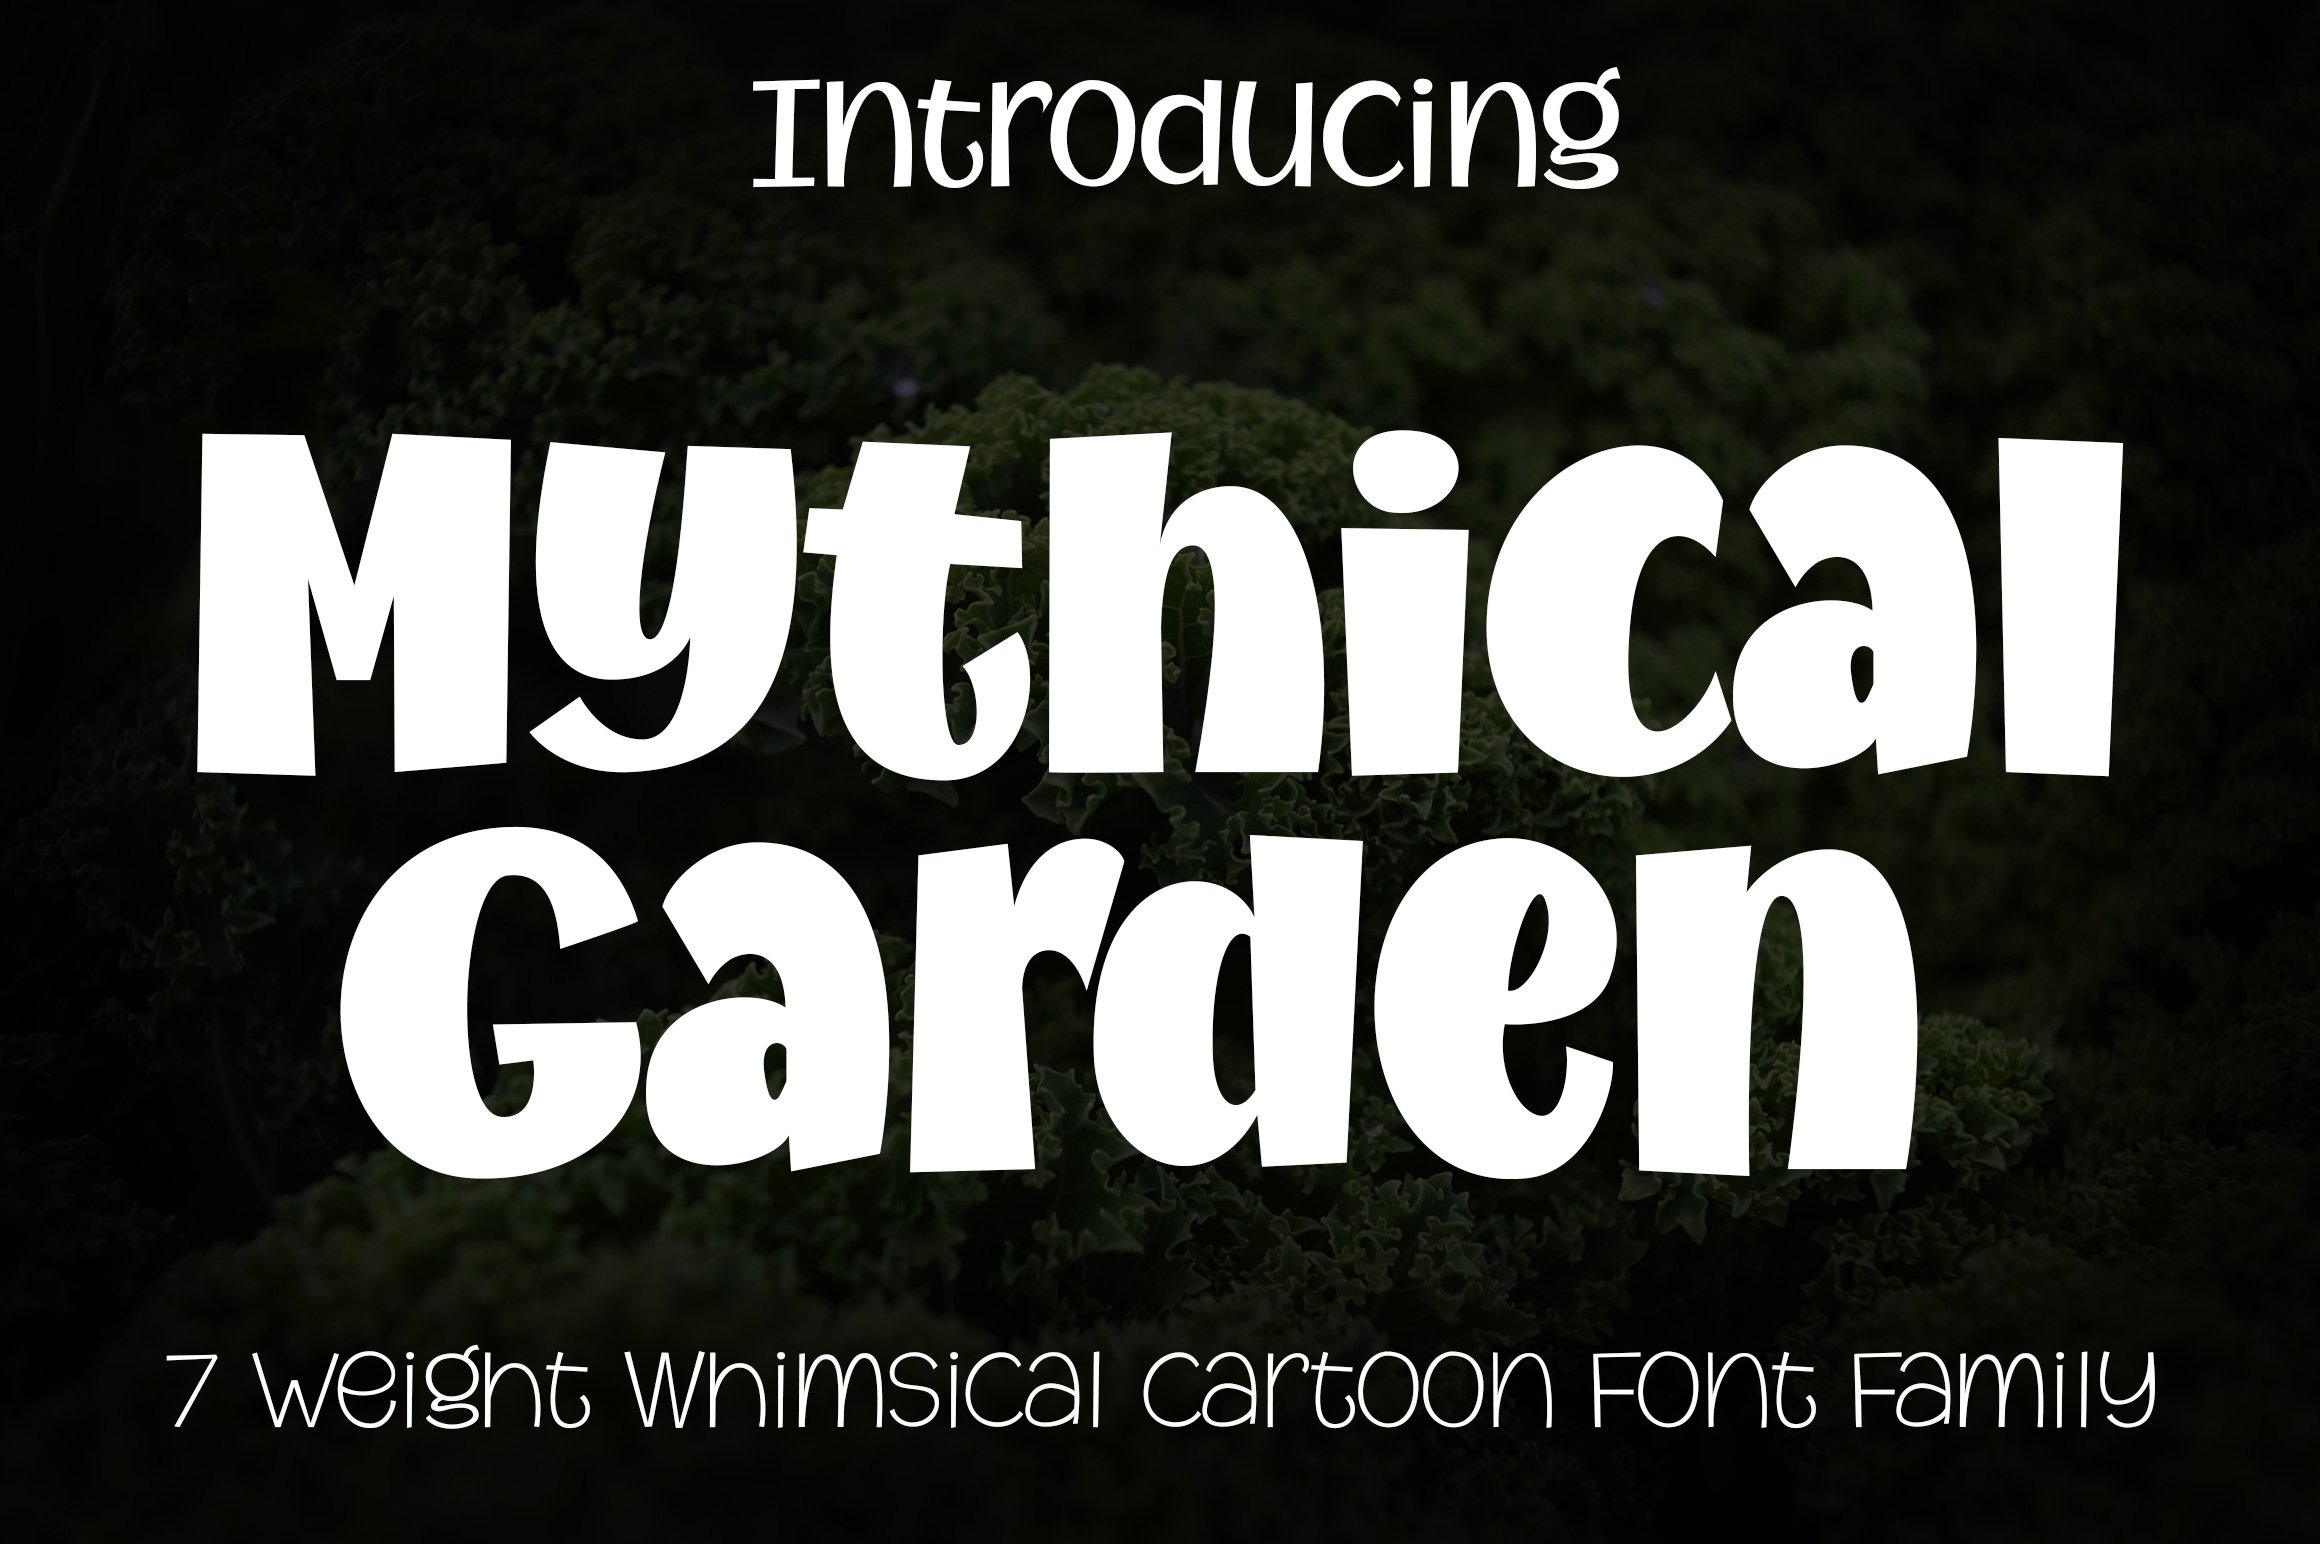 Mythical Garden Font Family cover image.